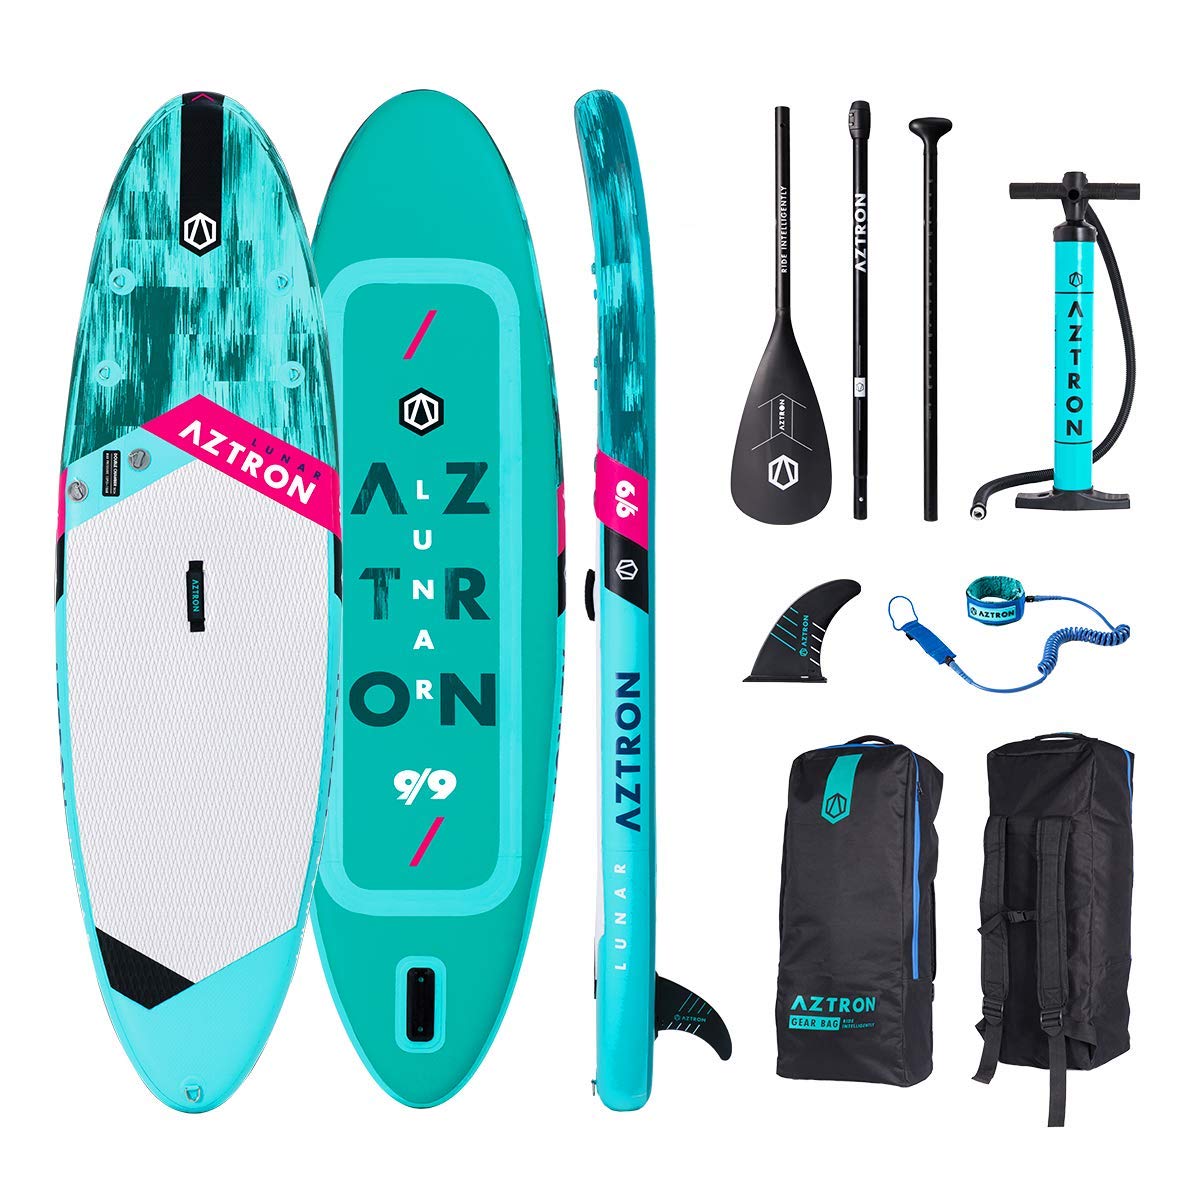 AZTRON Lunar 9.9 Sup Stand up Paddle Board mit Style Alu Paddel und Leash